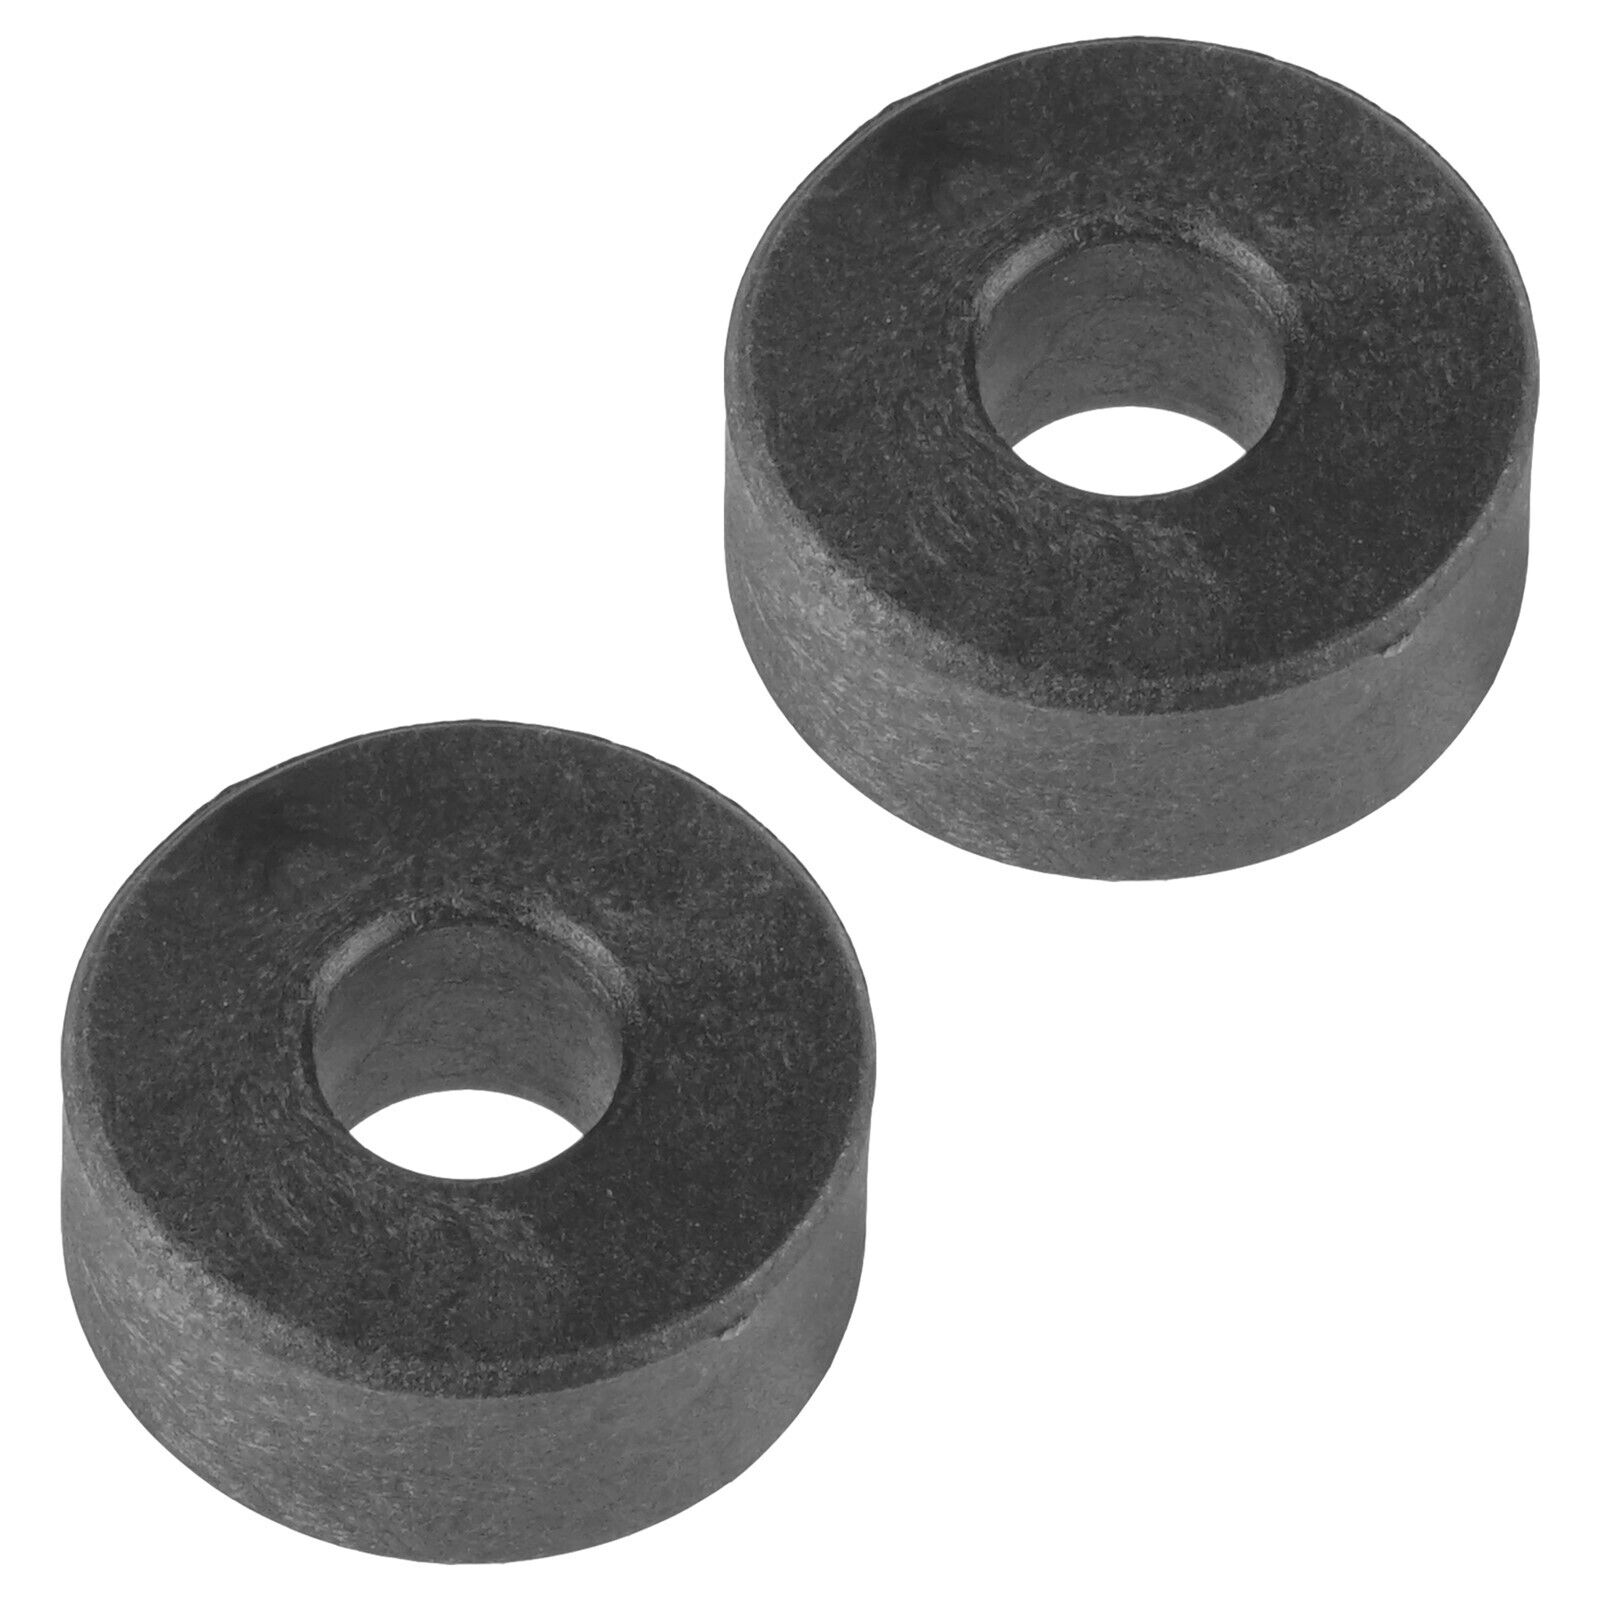 2X Caltric Secondary Clutch Roller for Polaris 5439831